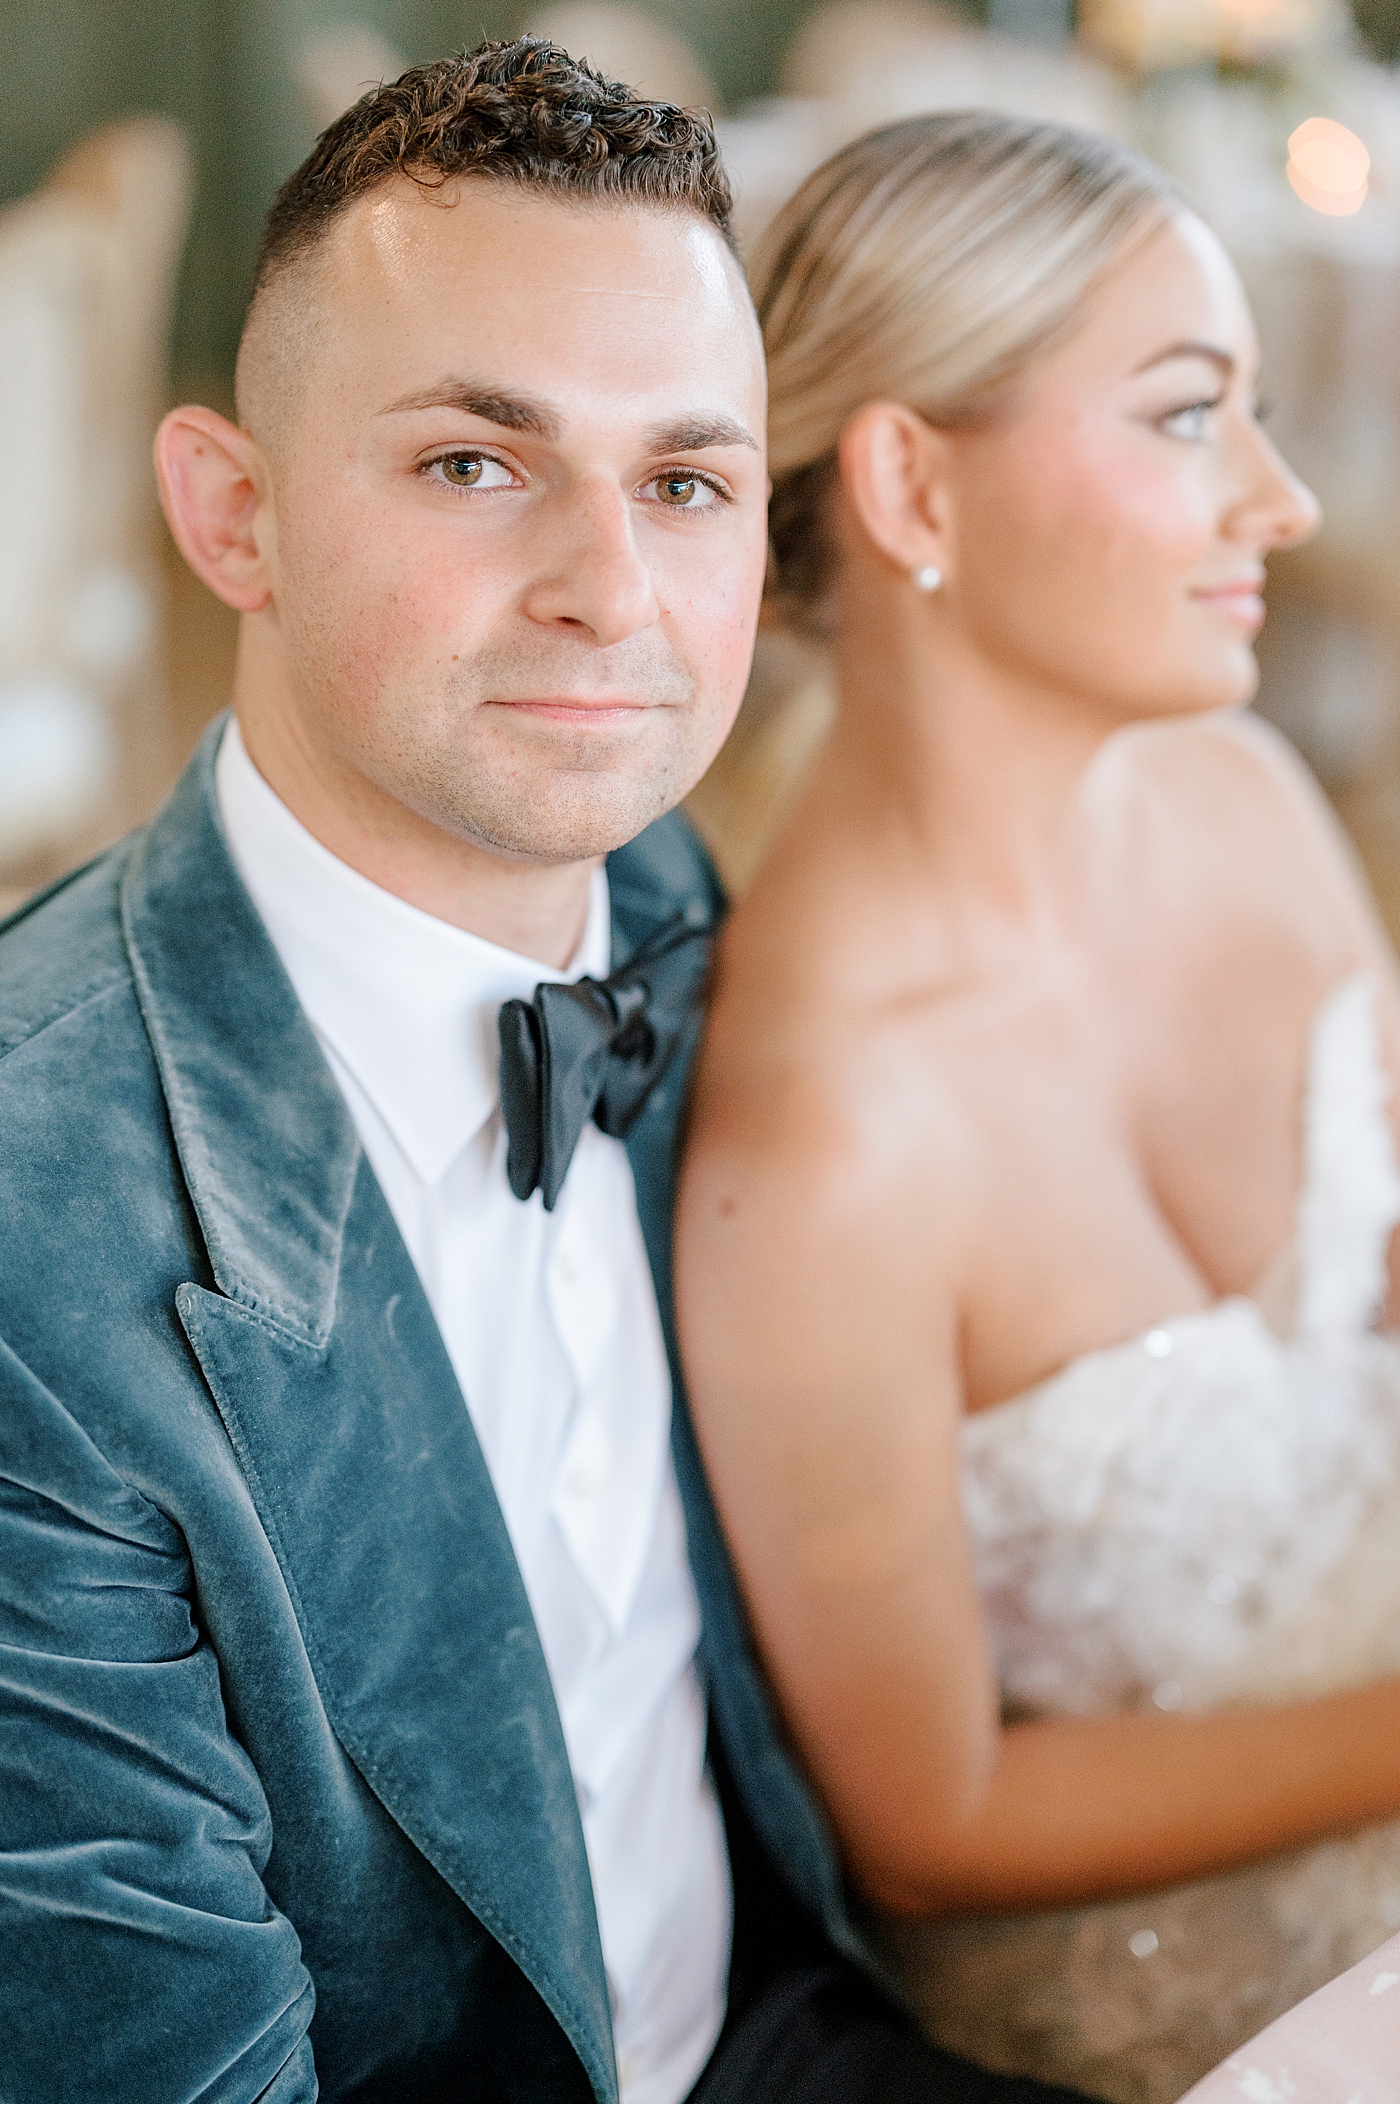 Bride and groom during reception | Image by Hope Helmuth Photography